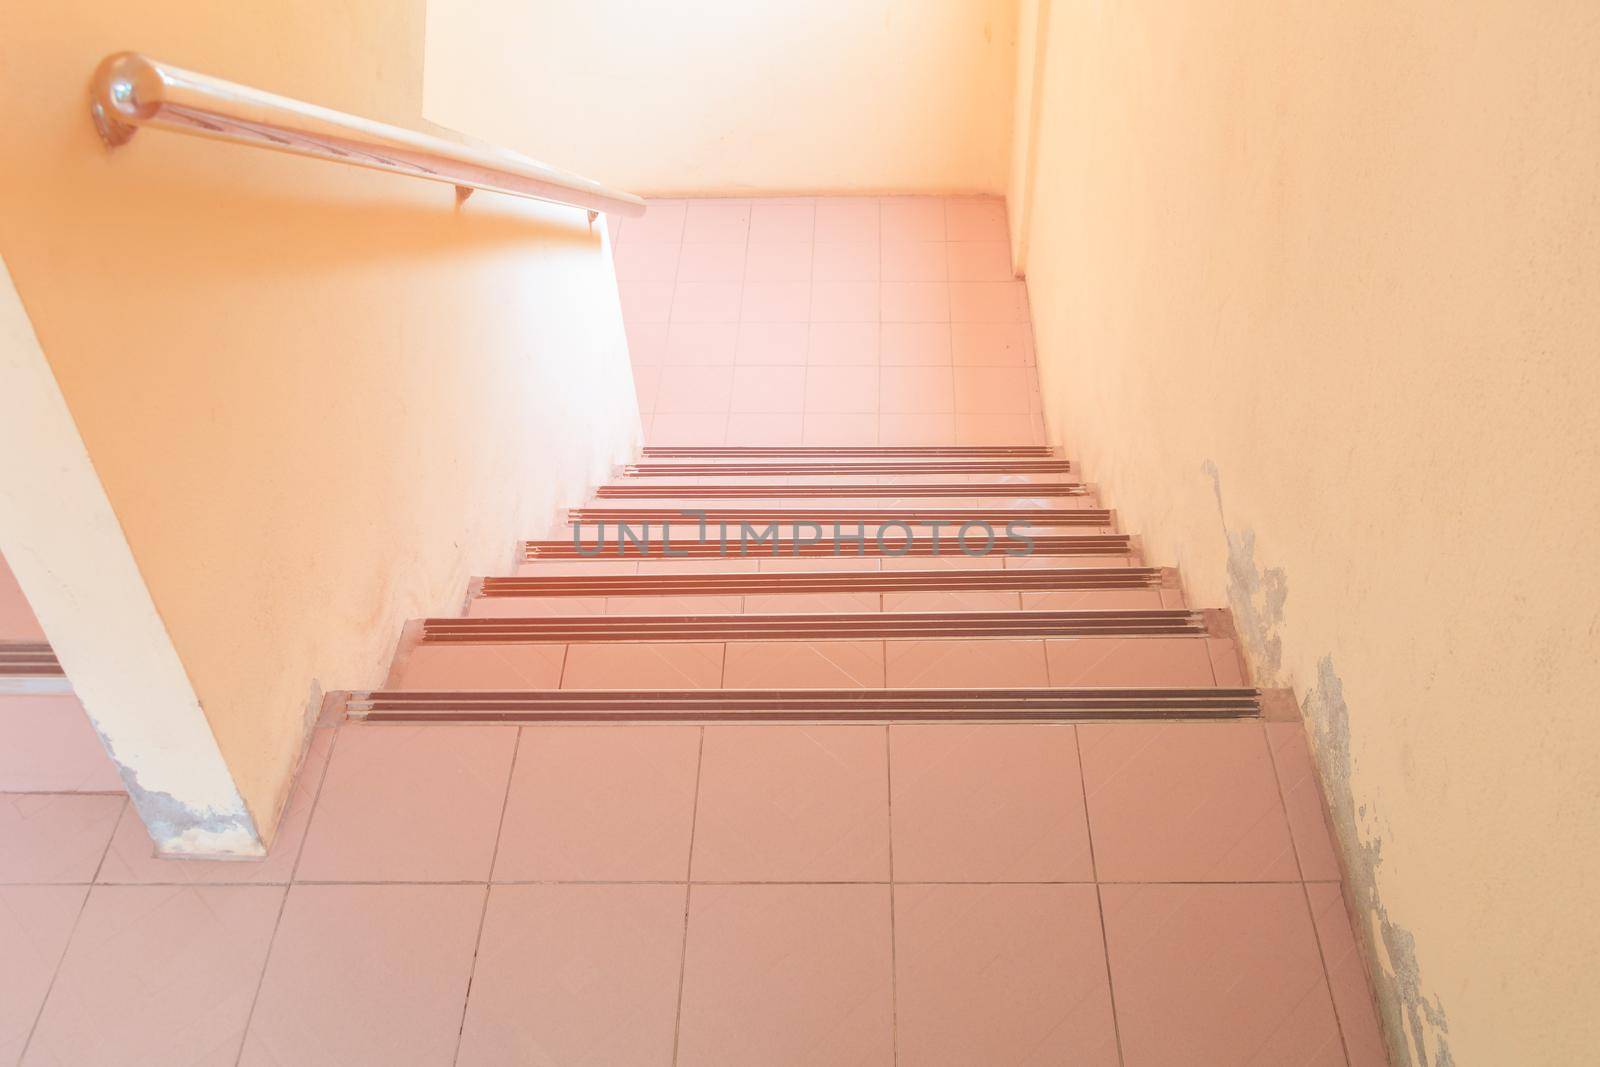 stairs walkway down terrazzo floor. select focus with shallow depth of field